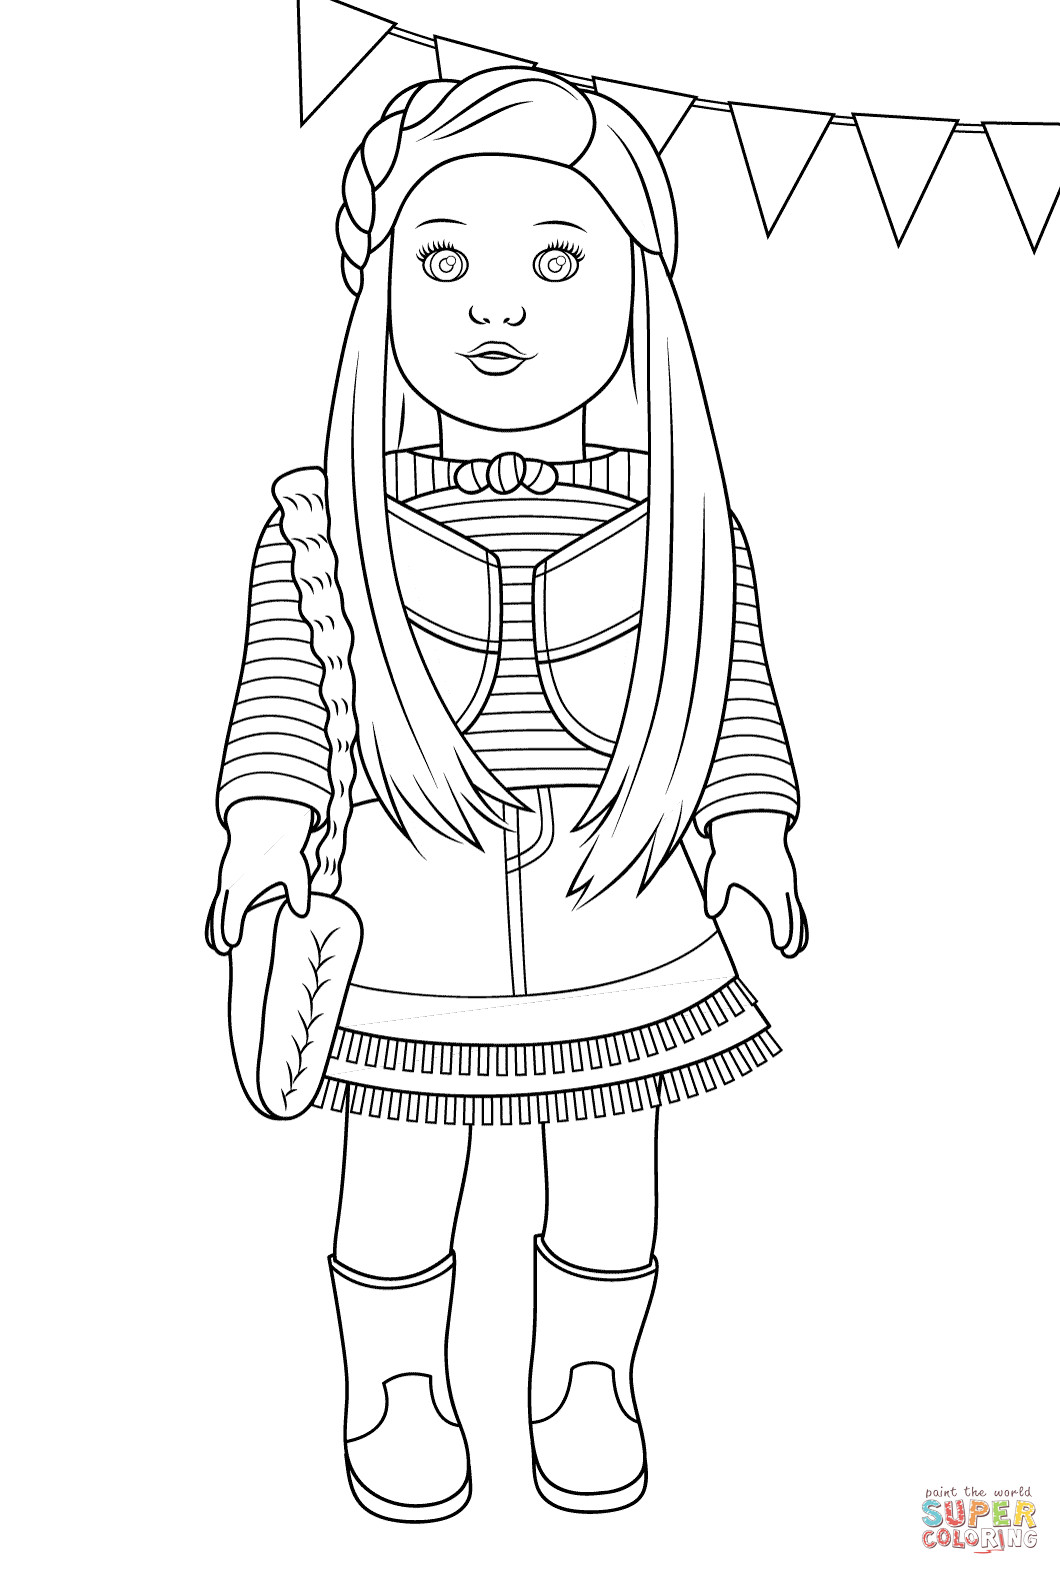 American Girl Isabelle Coloring Pages
 American Girl Mckenna coloring page